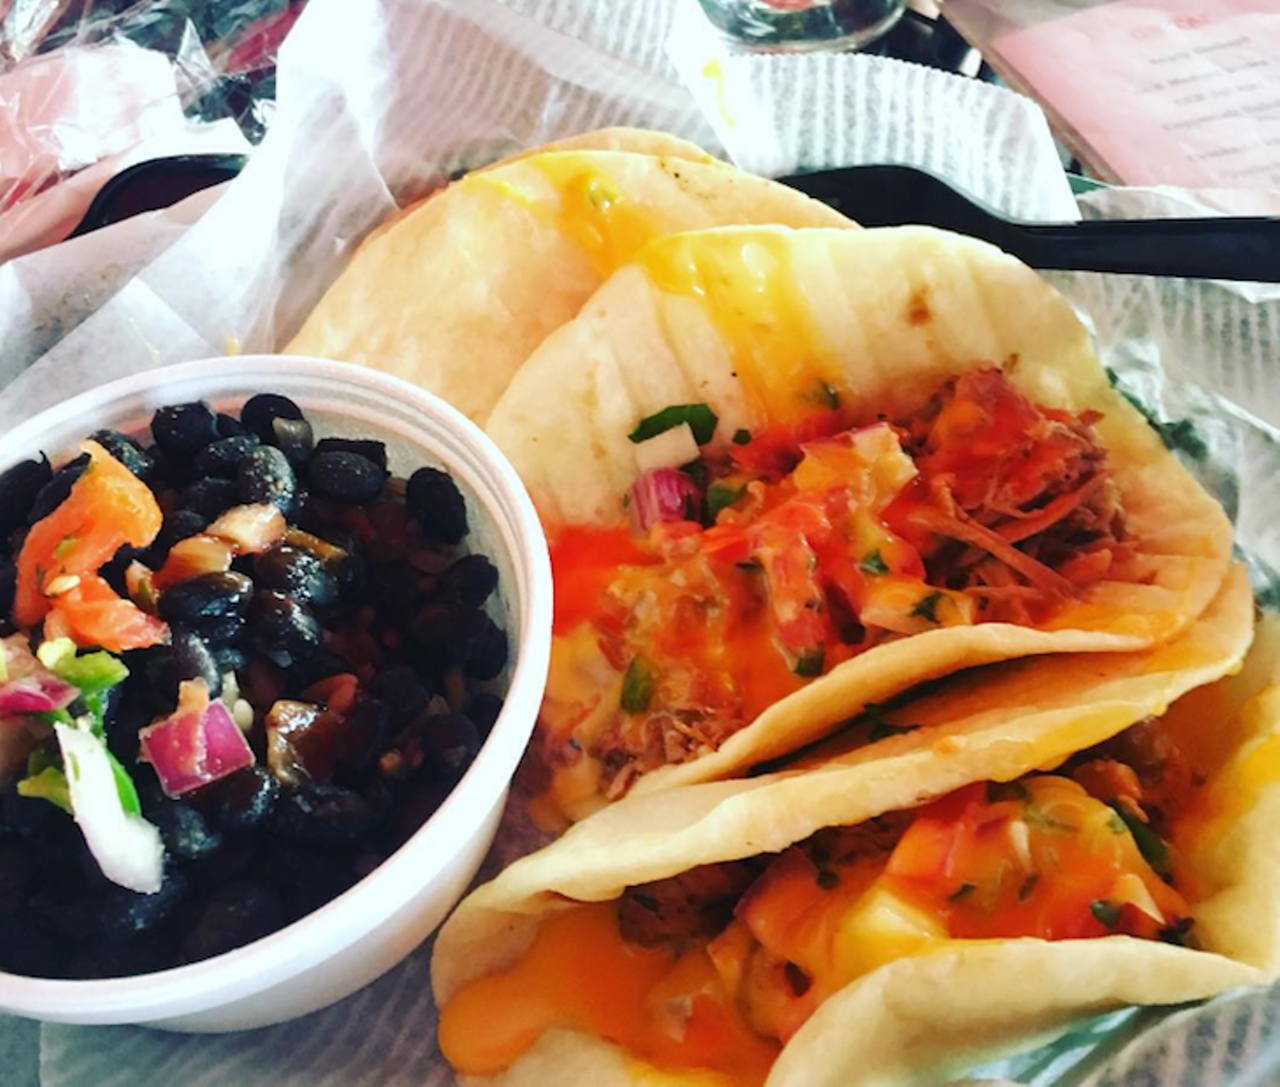 Sloppy Taco Palace
4892 S Kirkman Rd, Orlando, (407) 574-6474
Music, tots, tacos. Those three things are all being served up at Sloppy Taco Palace, which offers $1.50 (sloppy) beef tacos every Tuesday.
Photo via goddesskay/Instagram